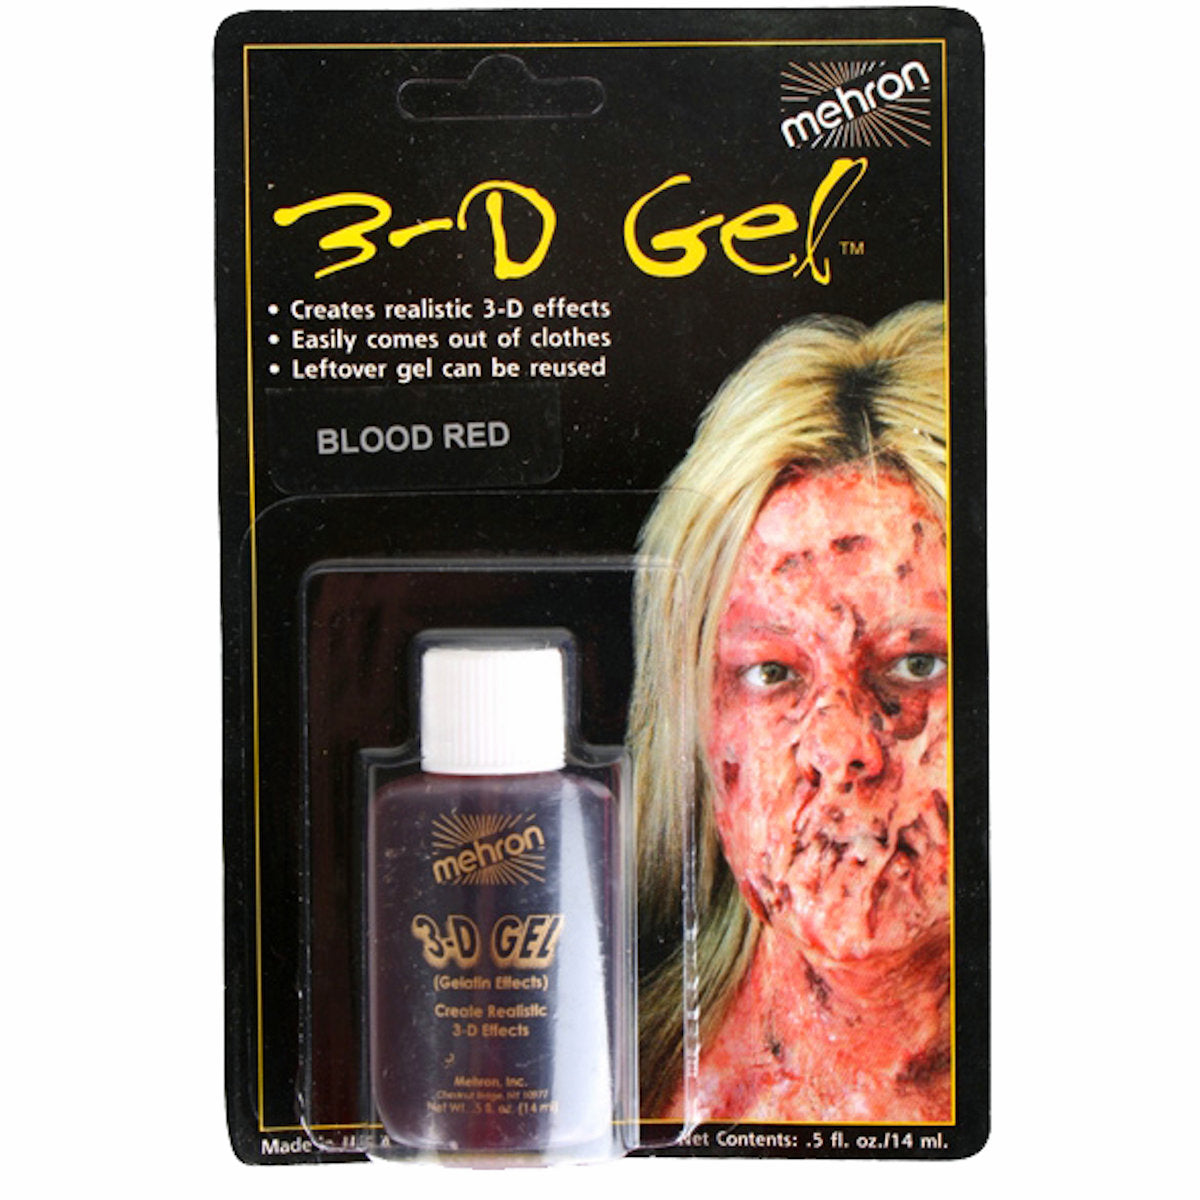 3D Gel Blood Red Zombie Monster Makup special effects fancy dress costume makeup